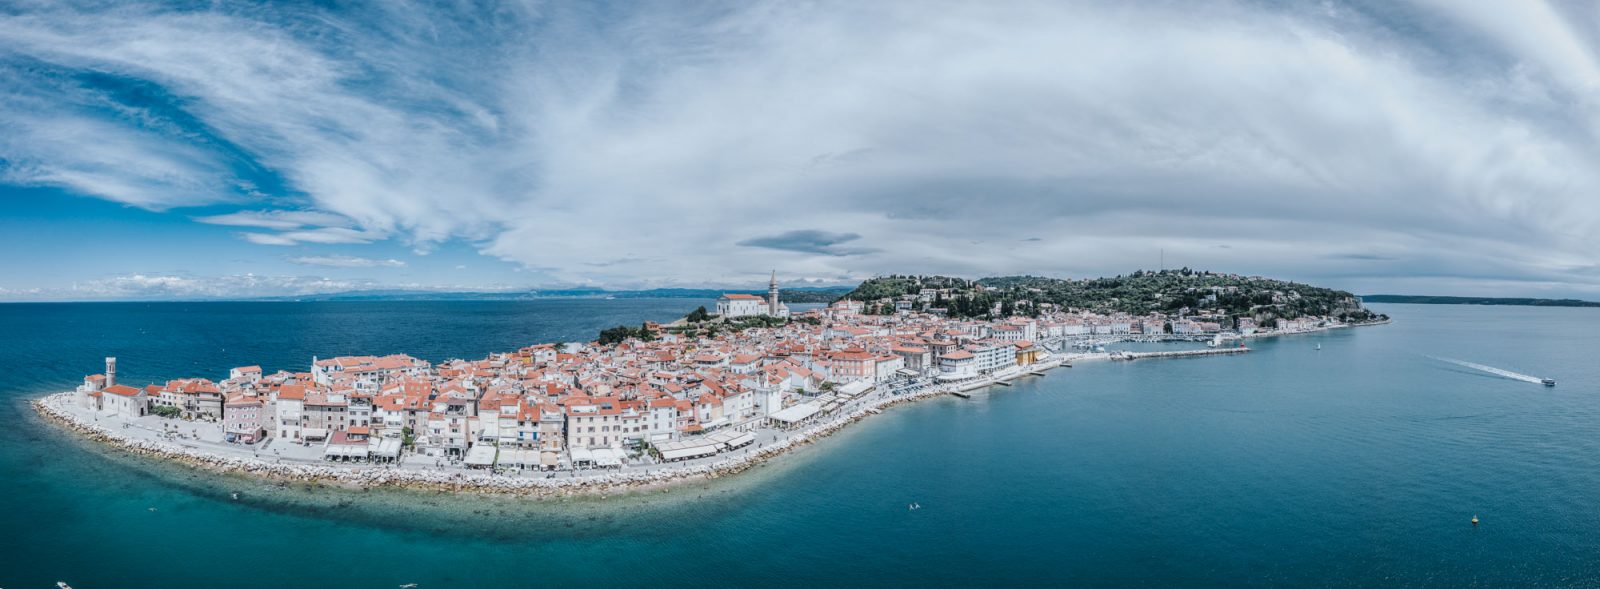 Your Ultimate Guide For Visiting Piran, Slovenia